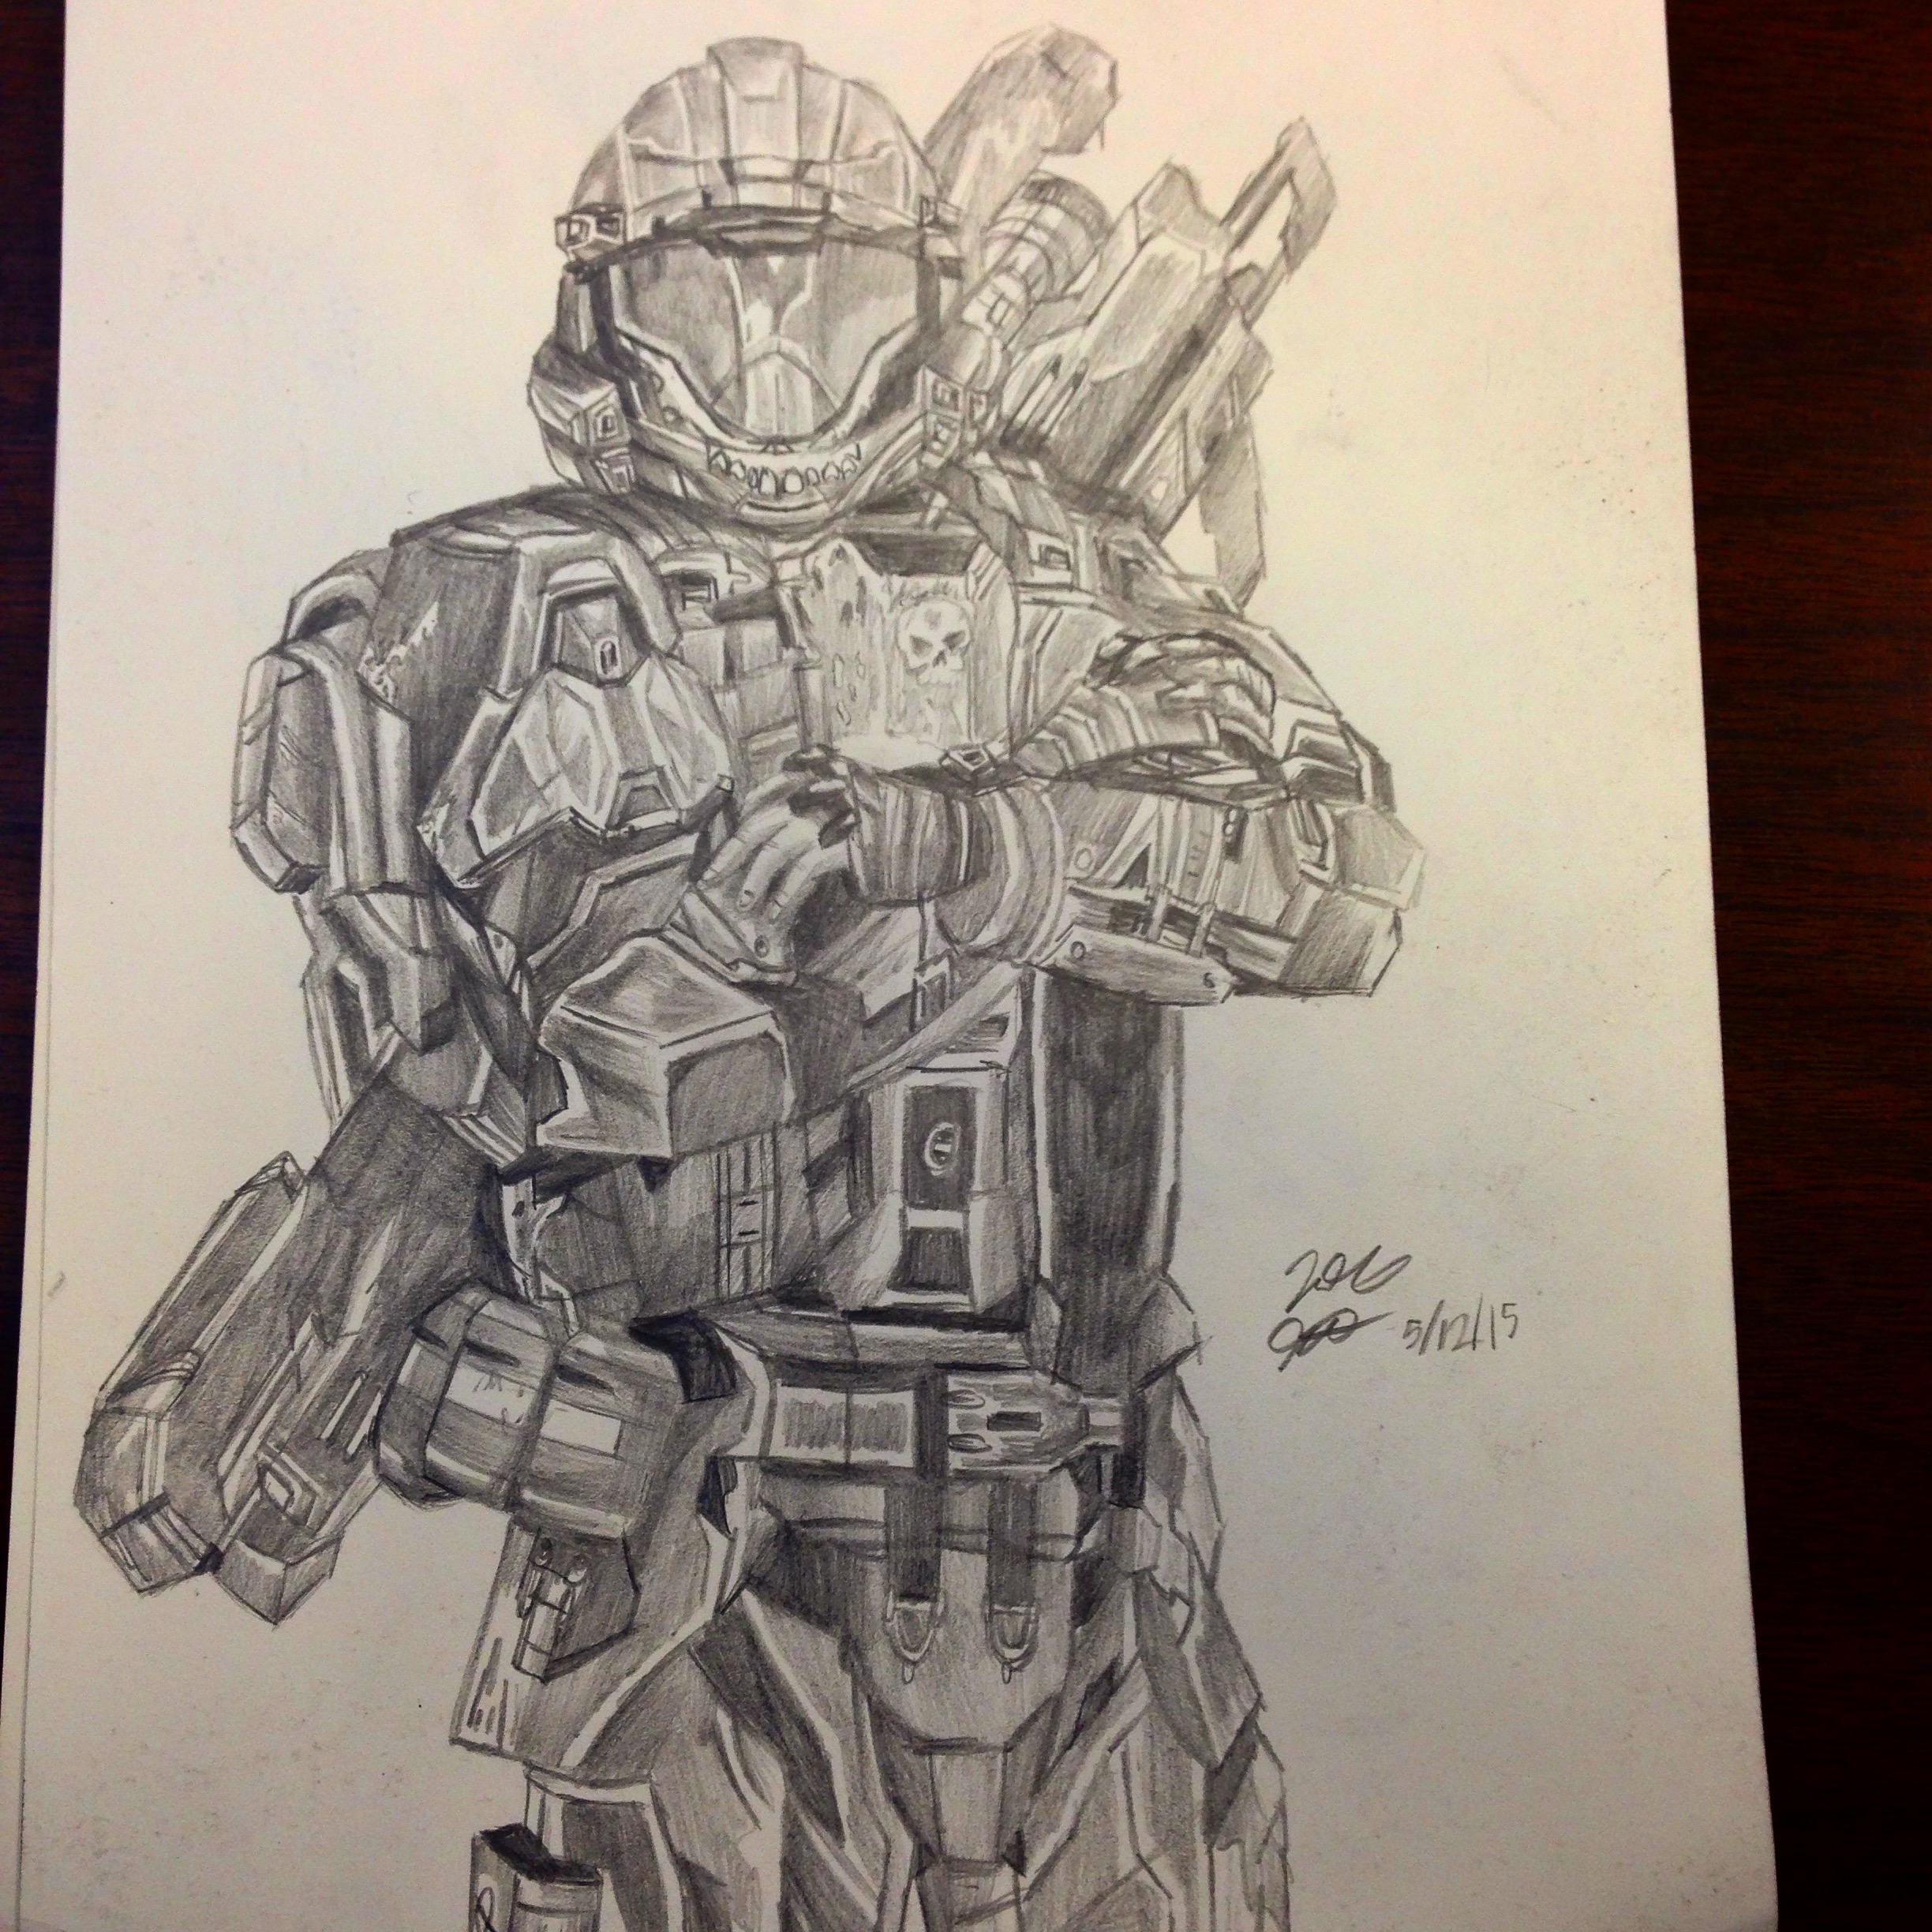 The best free Odst drawing images. Download from 18 free drawings of